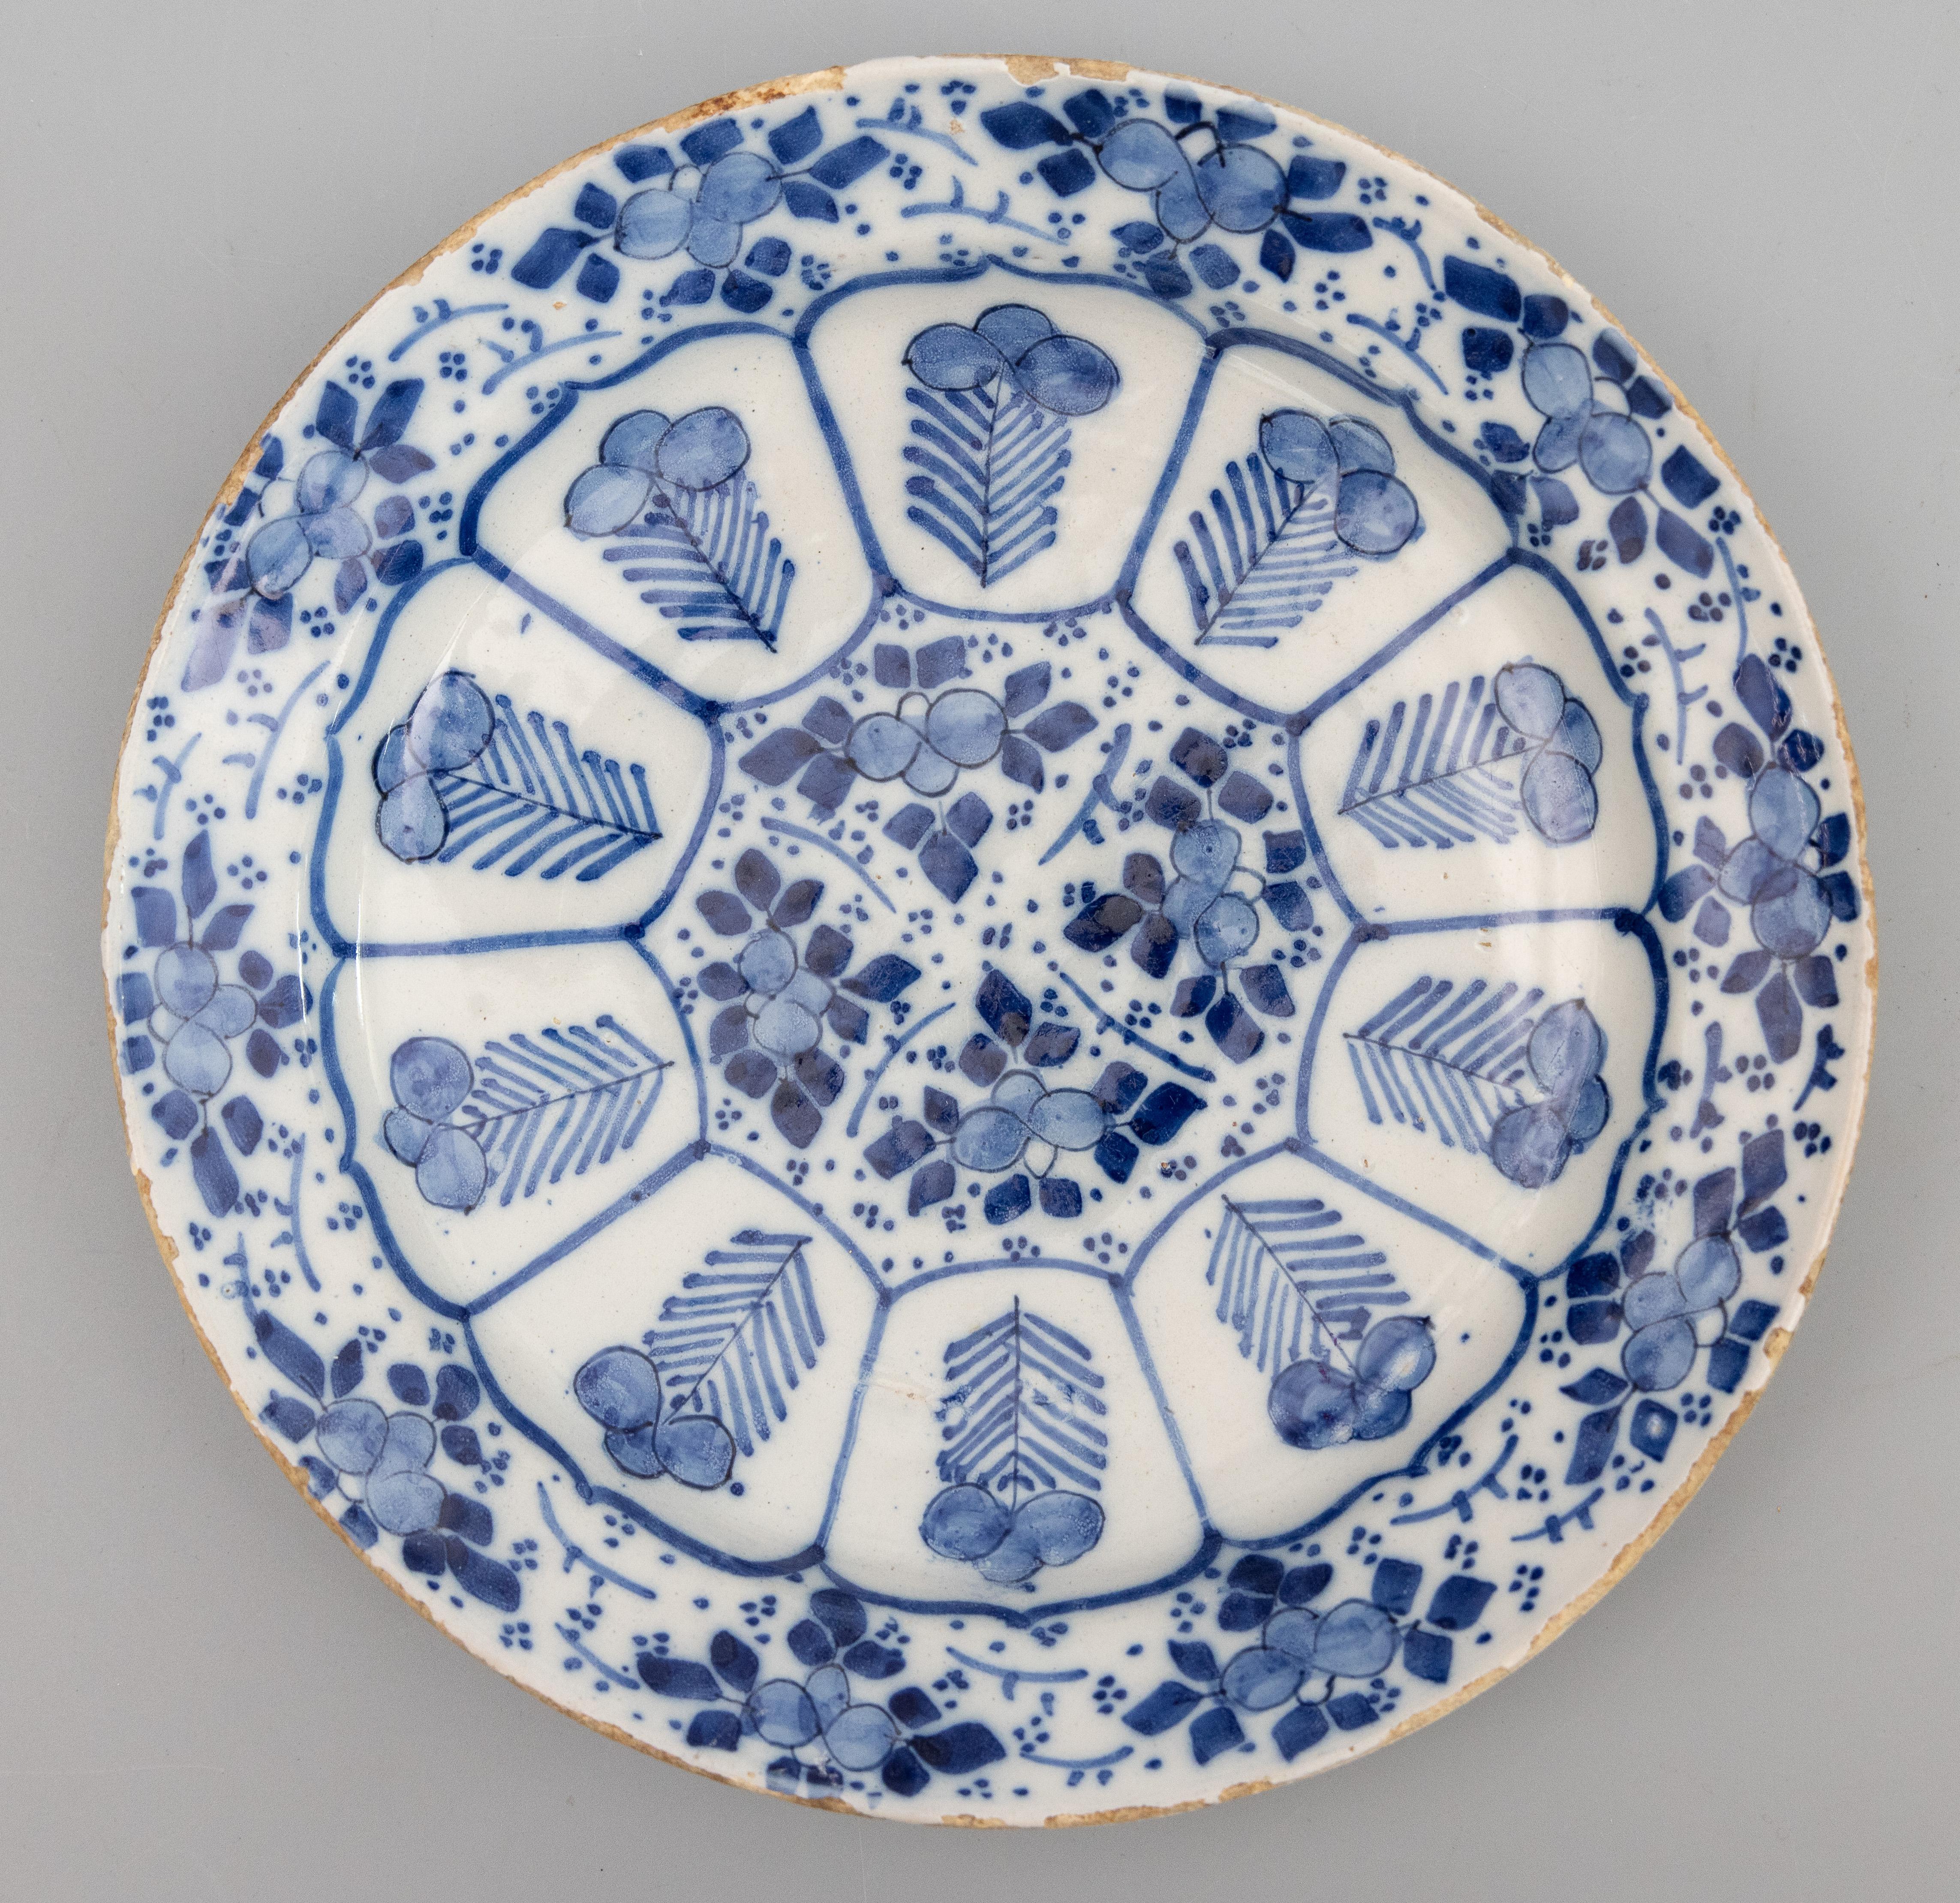 A lovely antique 18th-Century Dutch Delft faience tin glazed earthenware floral large plate or charger in the Kraak Style, circa 1750. This stunning plate is hand painted in vibrant cobalt blue and white and would look fabulous displayed on a wall